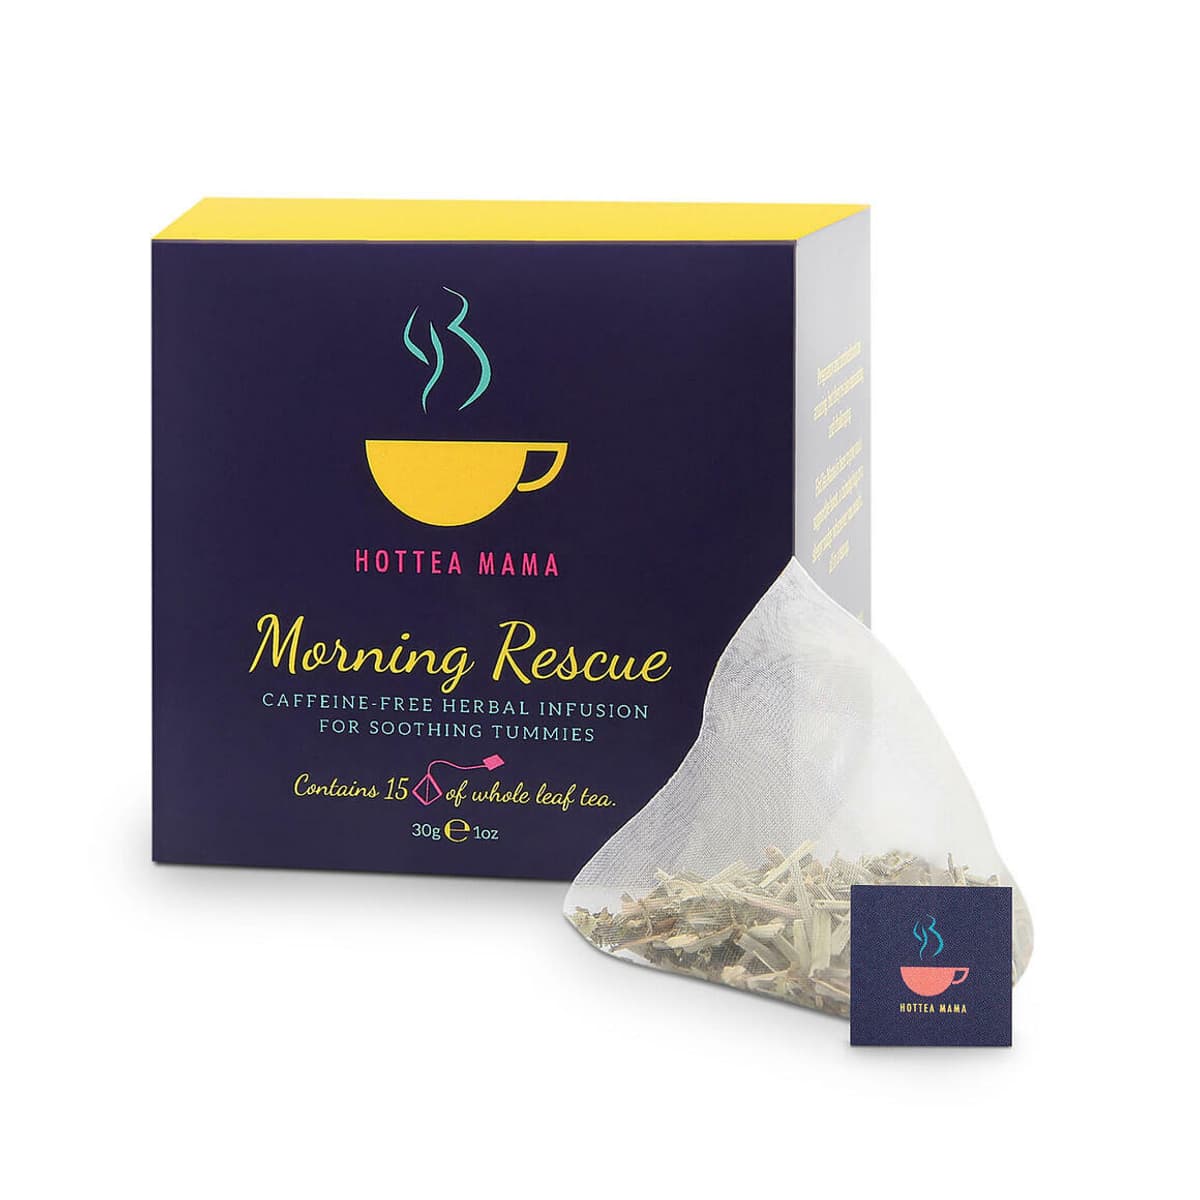 HOTTEA MAMA Morning Rescue Caffeine-free Herbal infusion